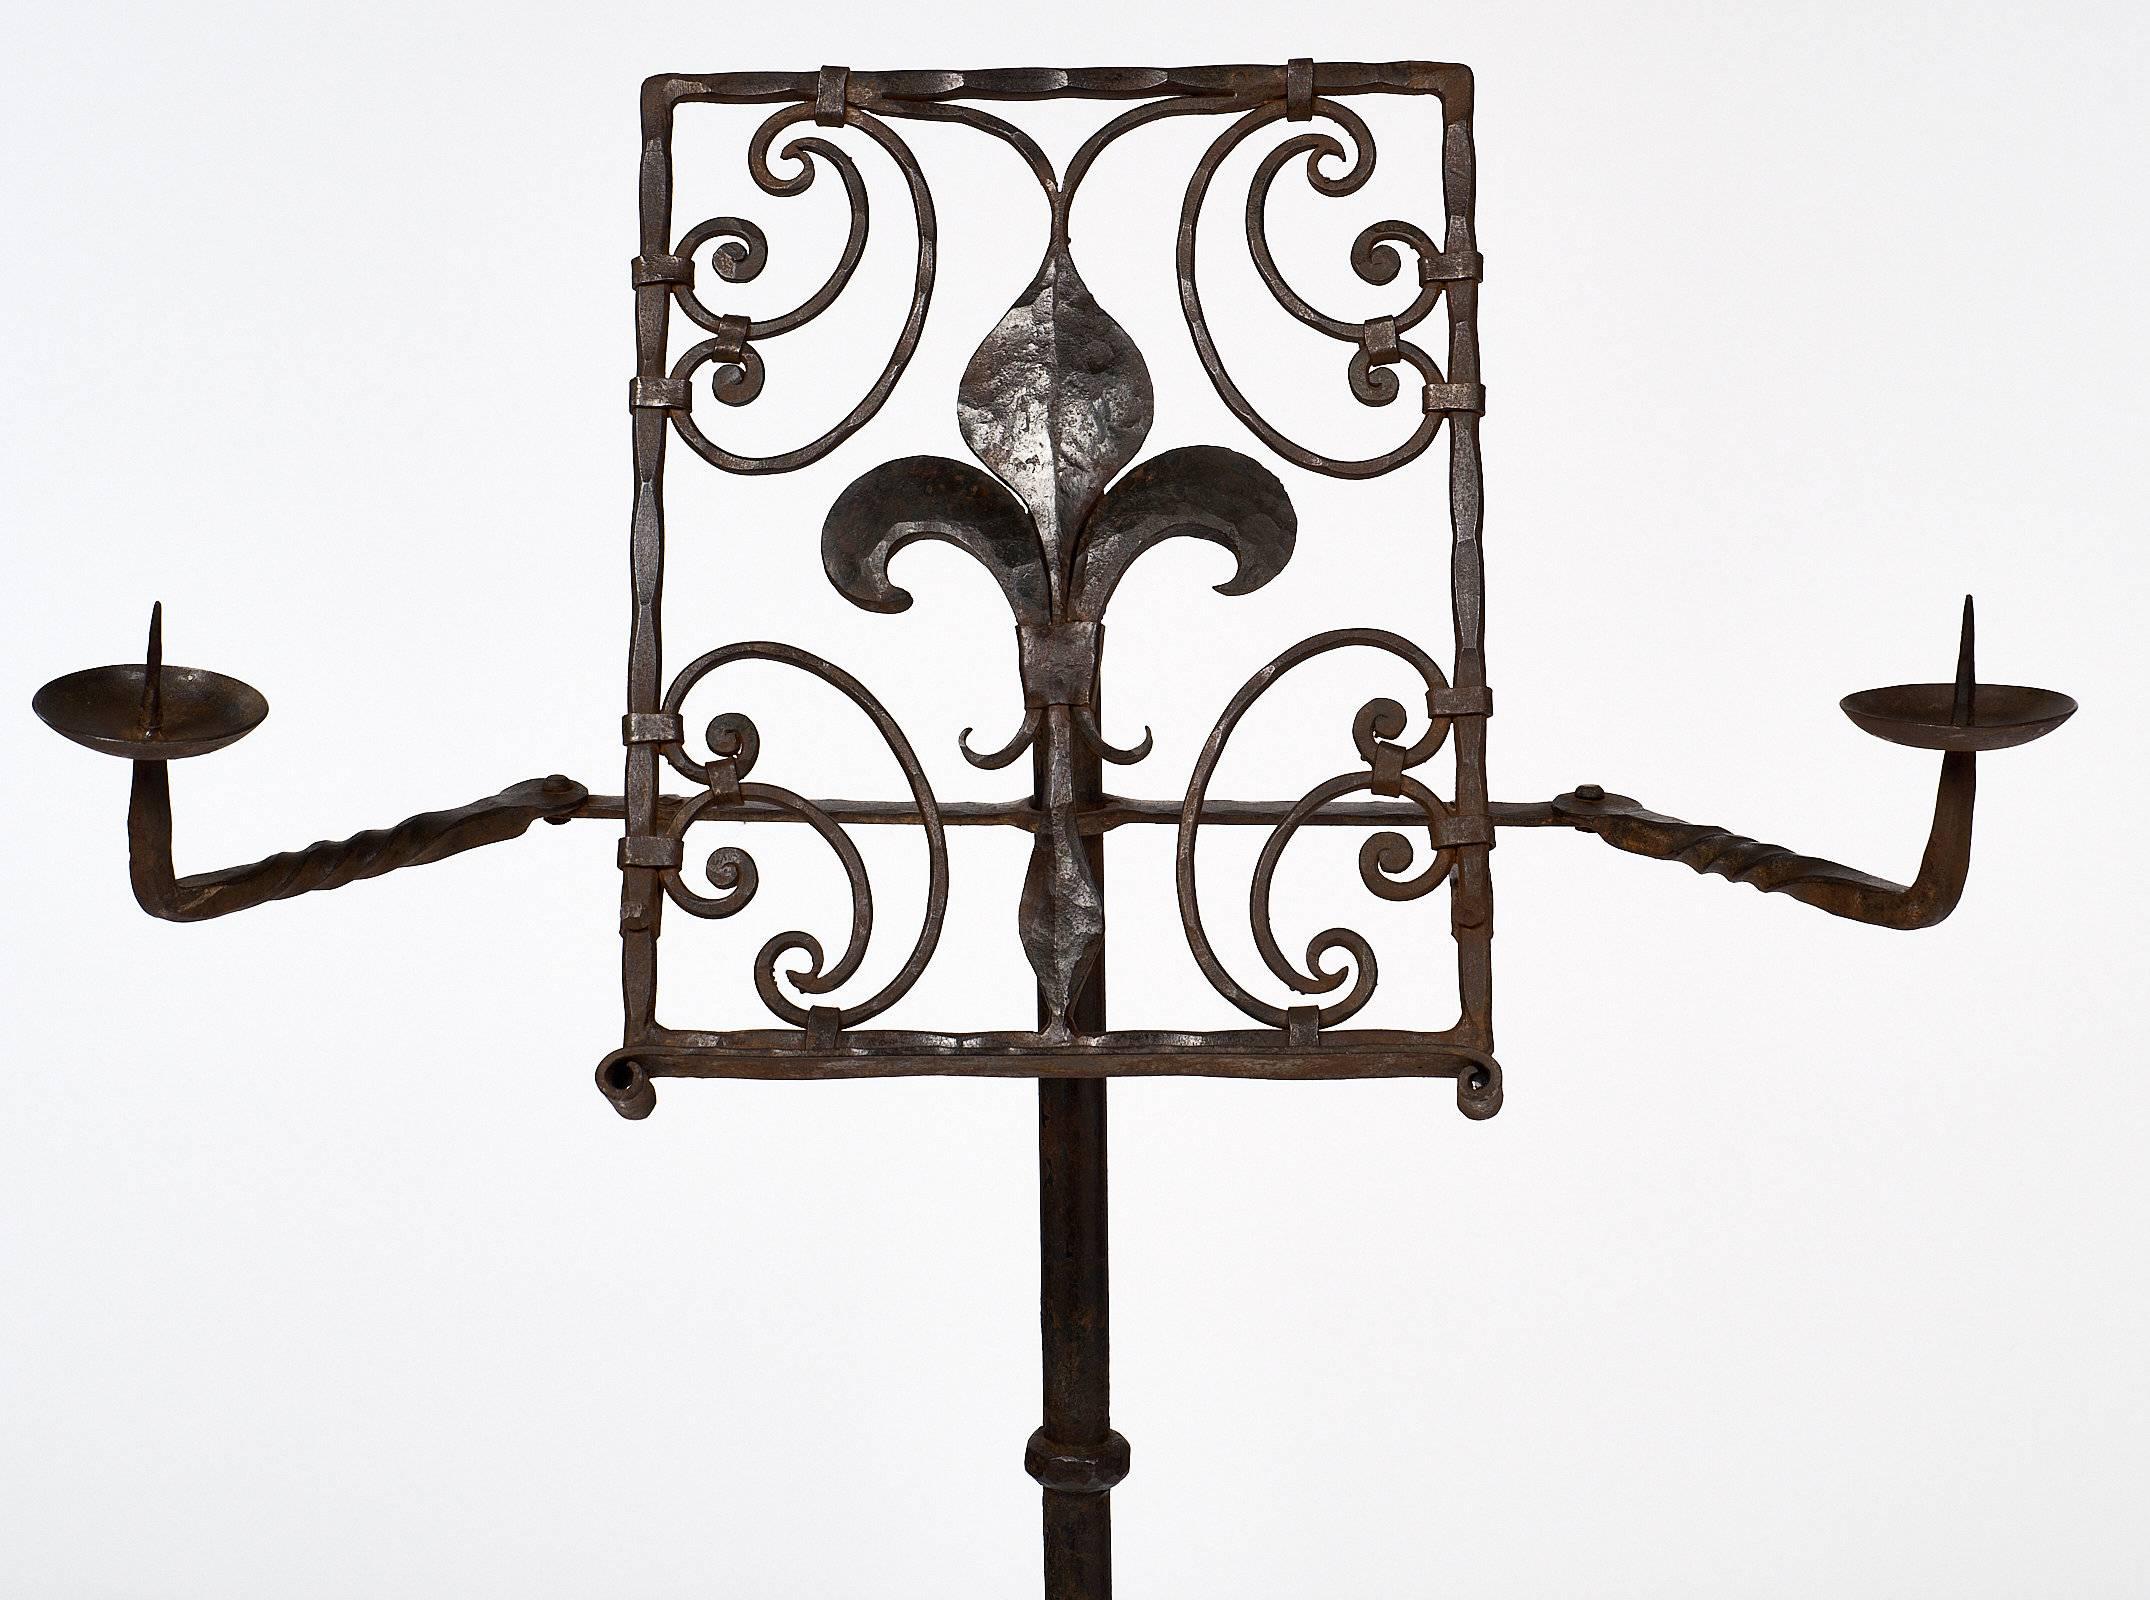 Hand-hammered French antique lectern in the Renaissance style from the 19th century. This forged iron piece is decorated with a fleur-de-lys and has two adjustable arms with candle holders. There is a tripod base on the bottom. This lectern is very